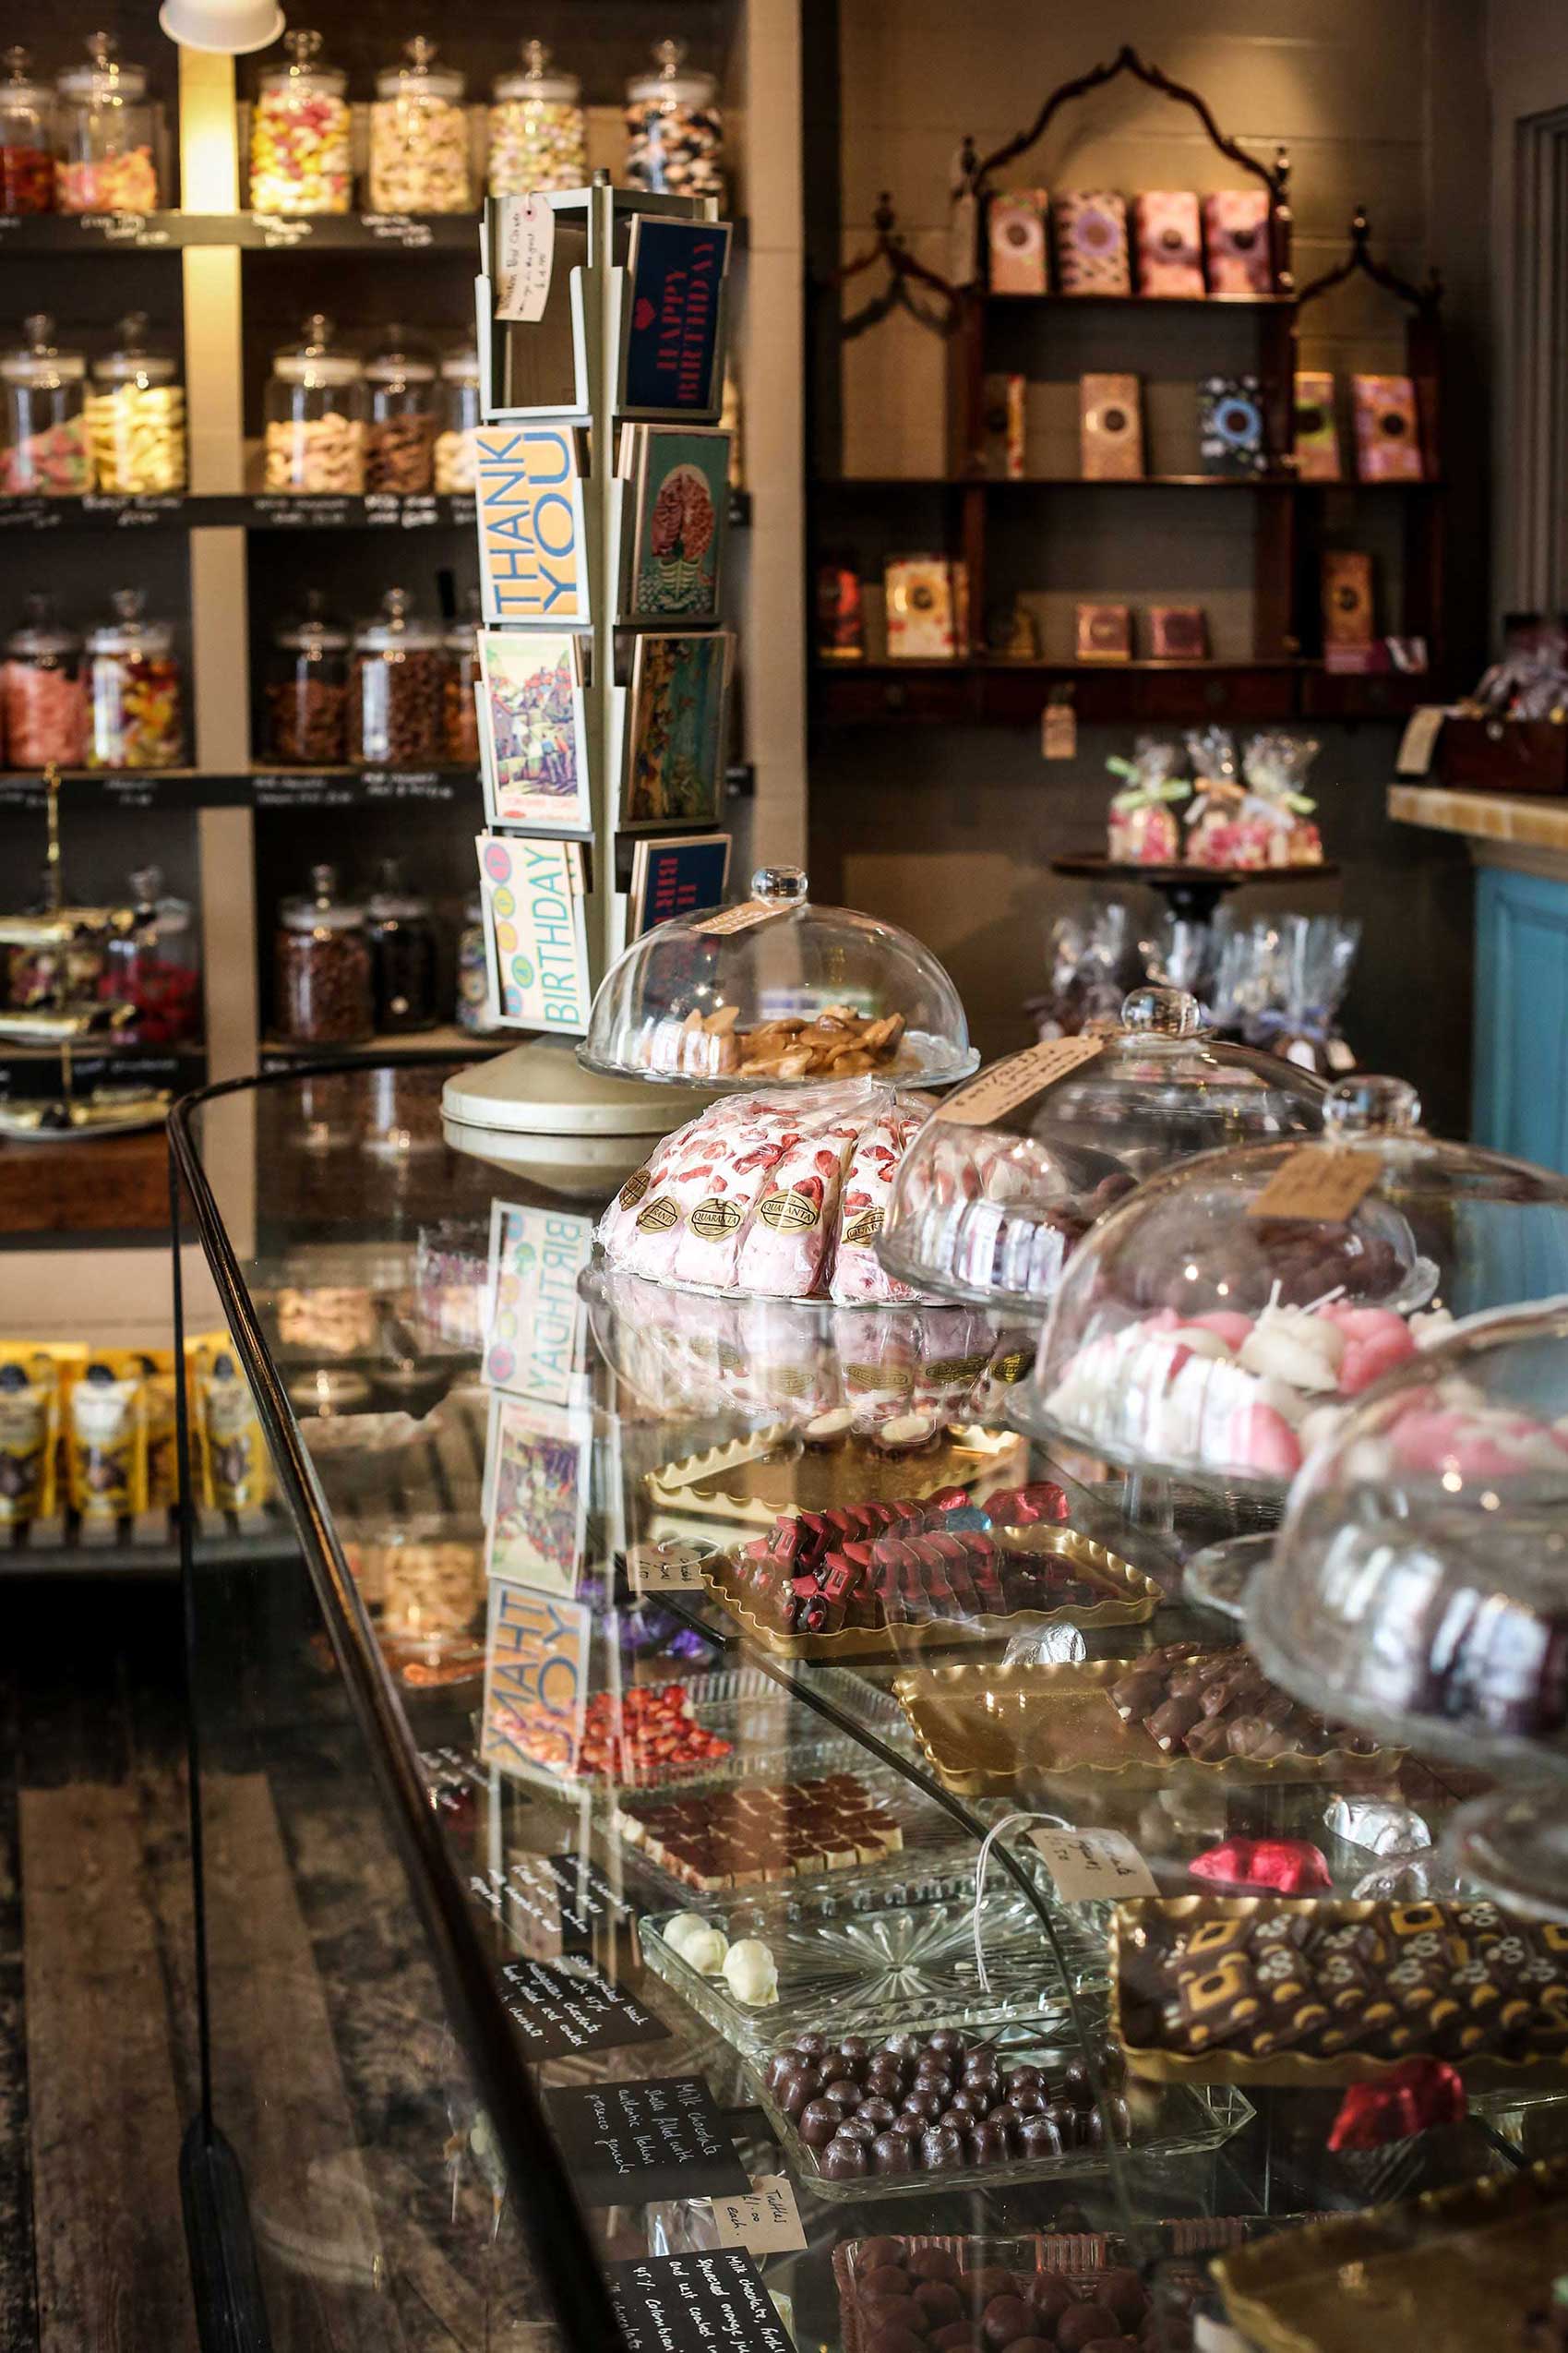 Glass counter filled with chocolates and shelves in the background filled with sweets by Polly Baldwin